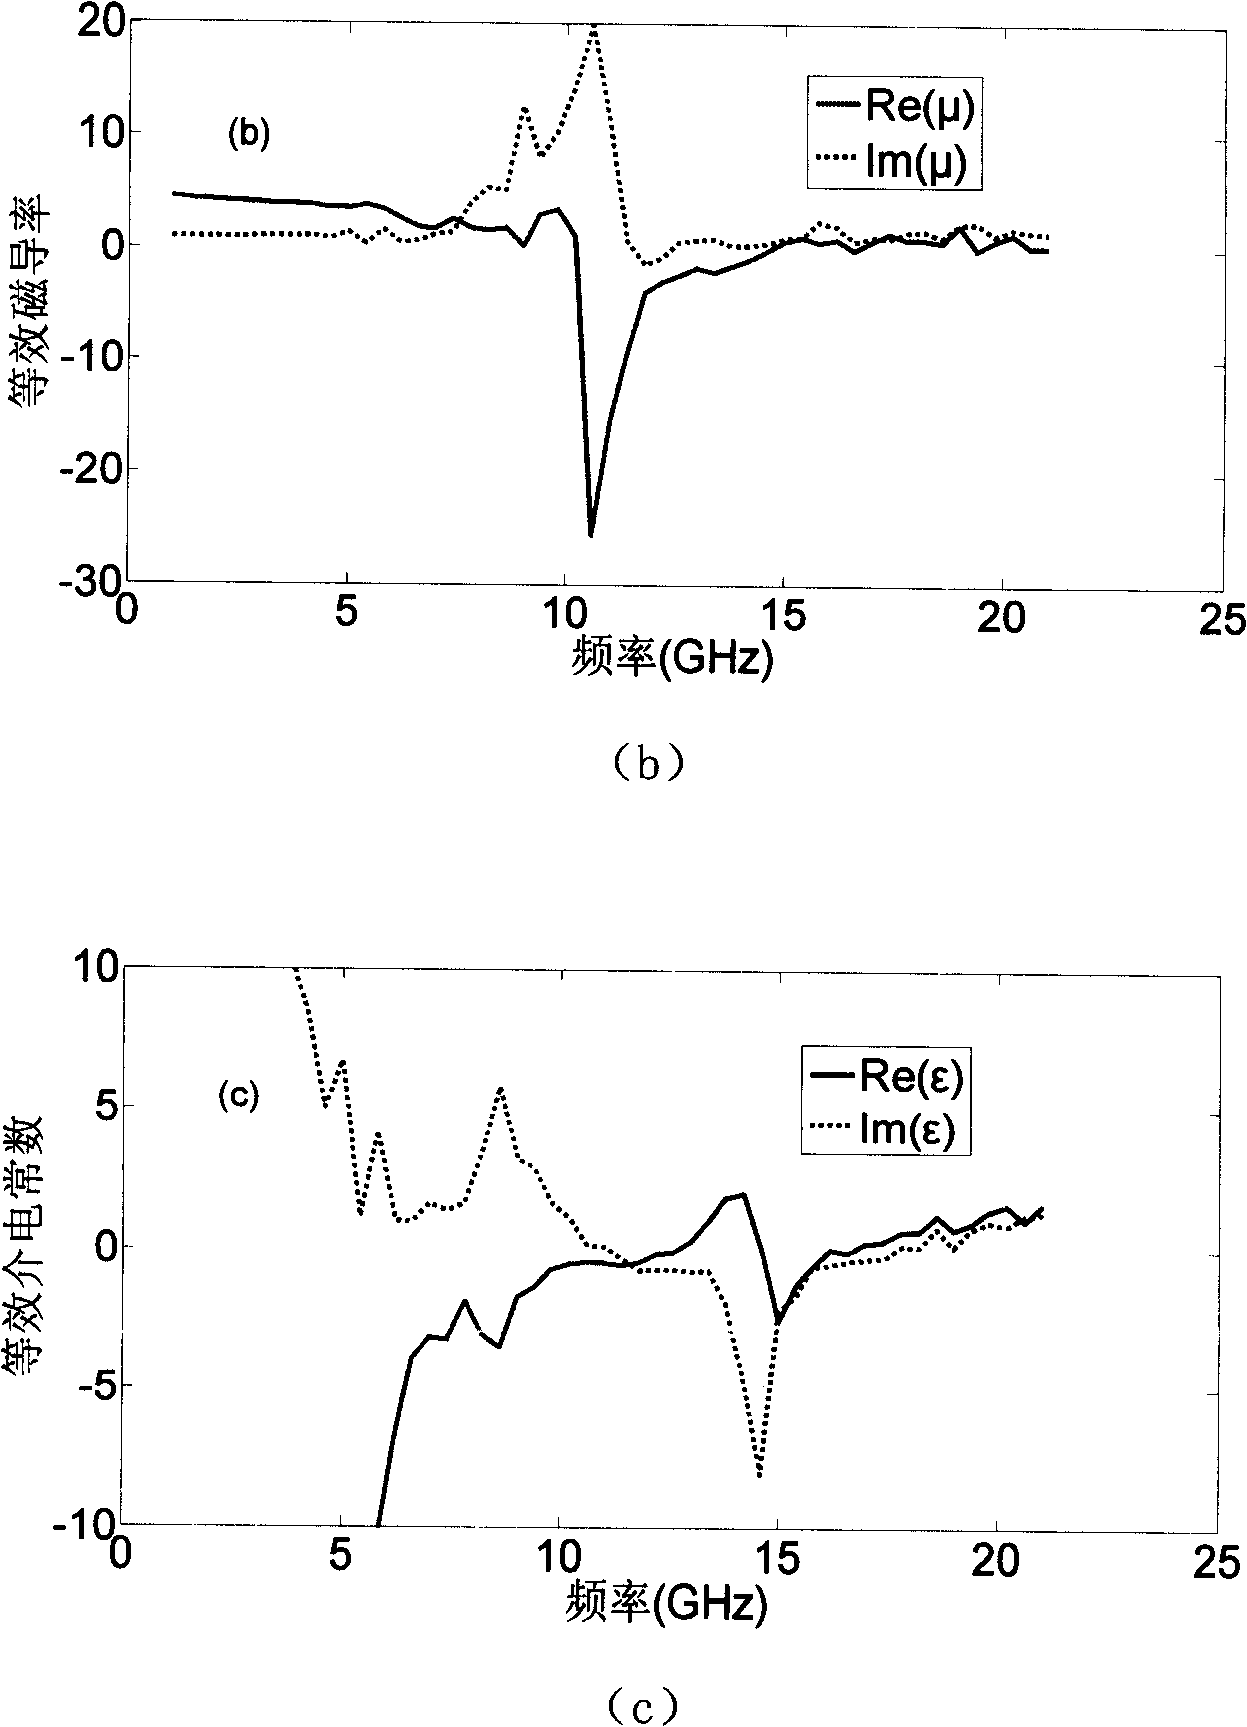 Tunable microwave material with negative refractive index